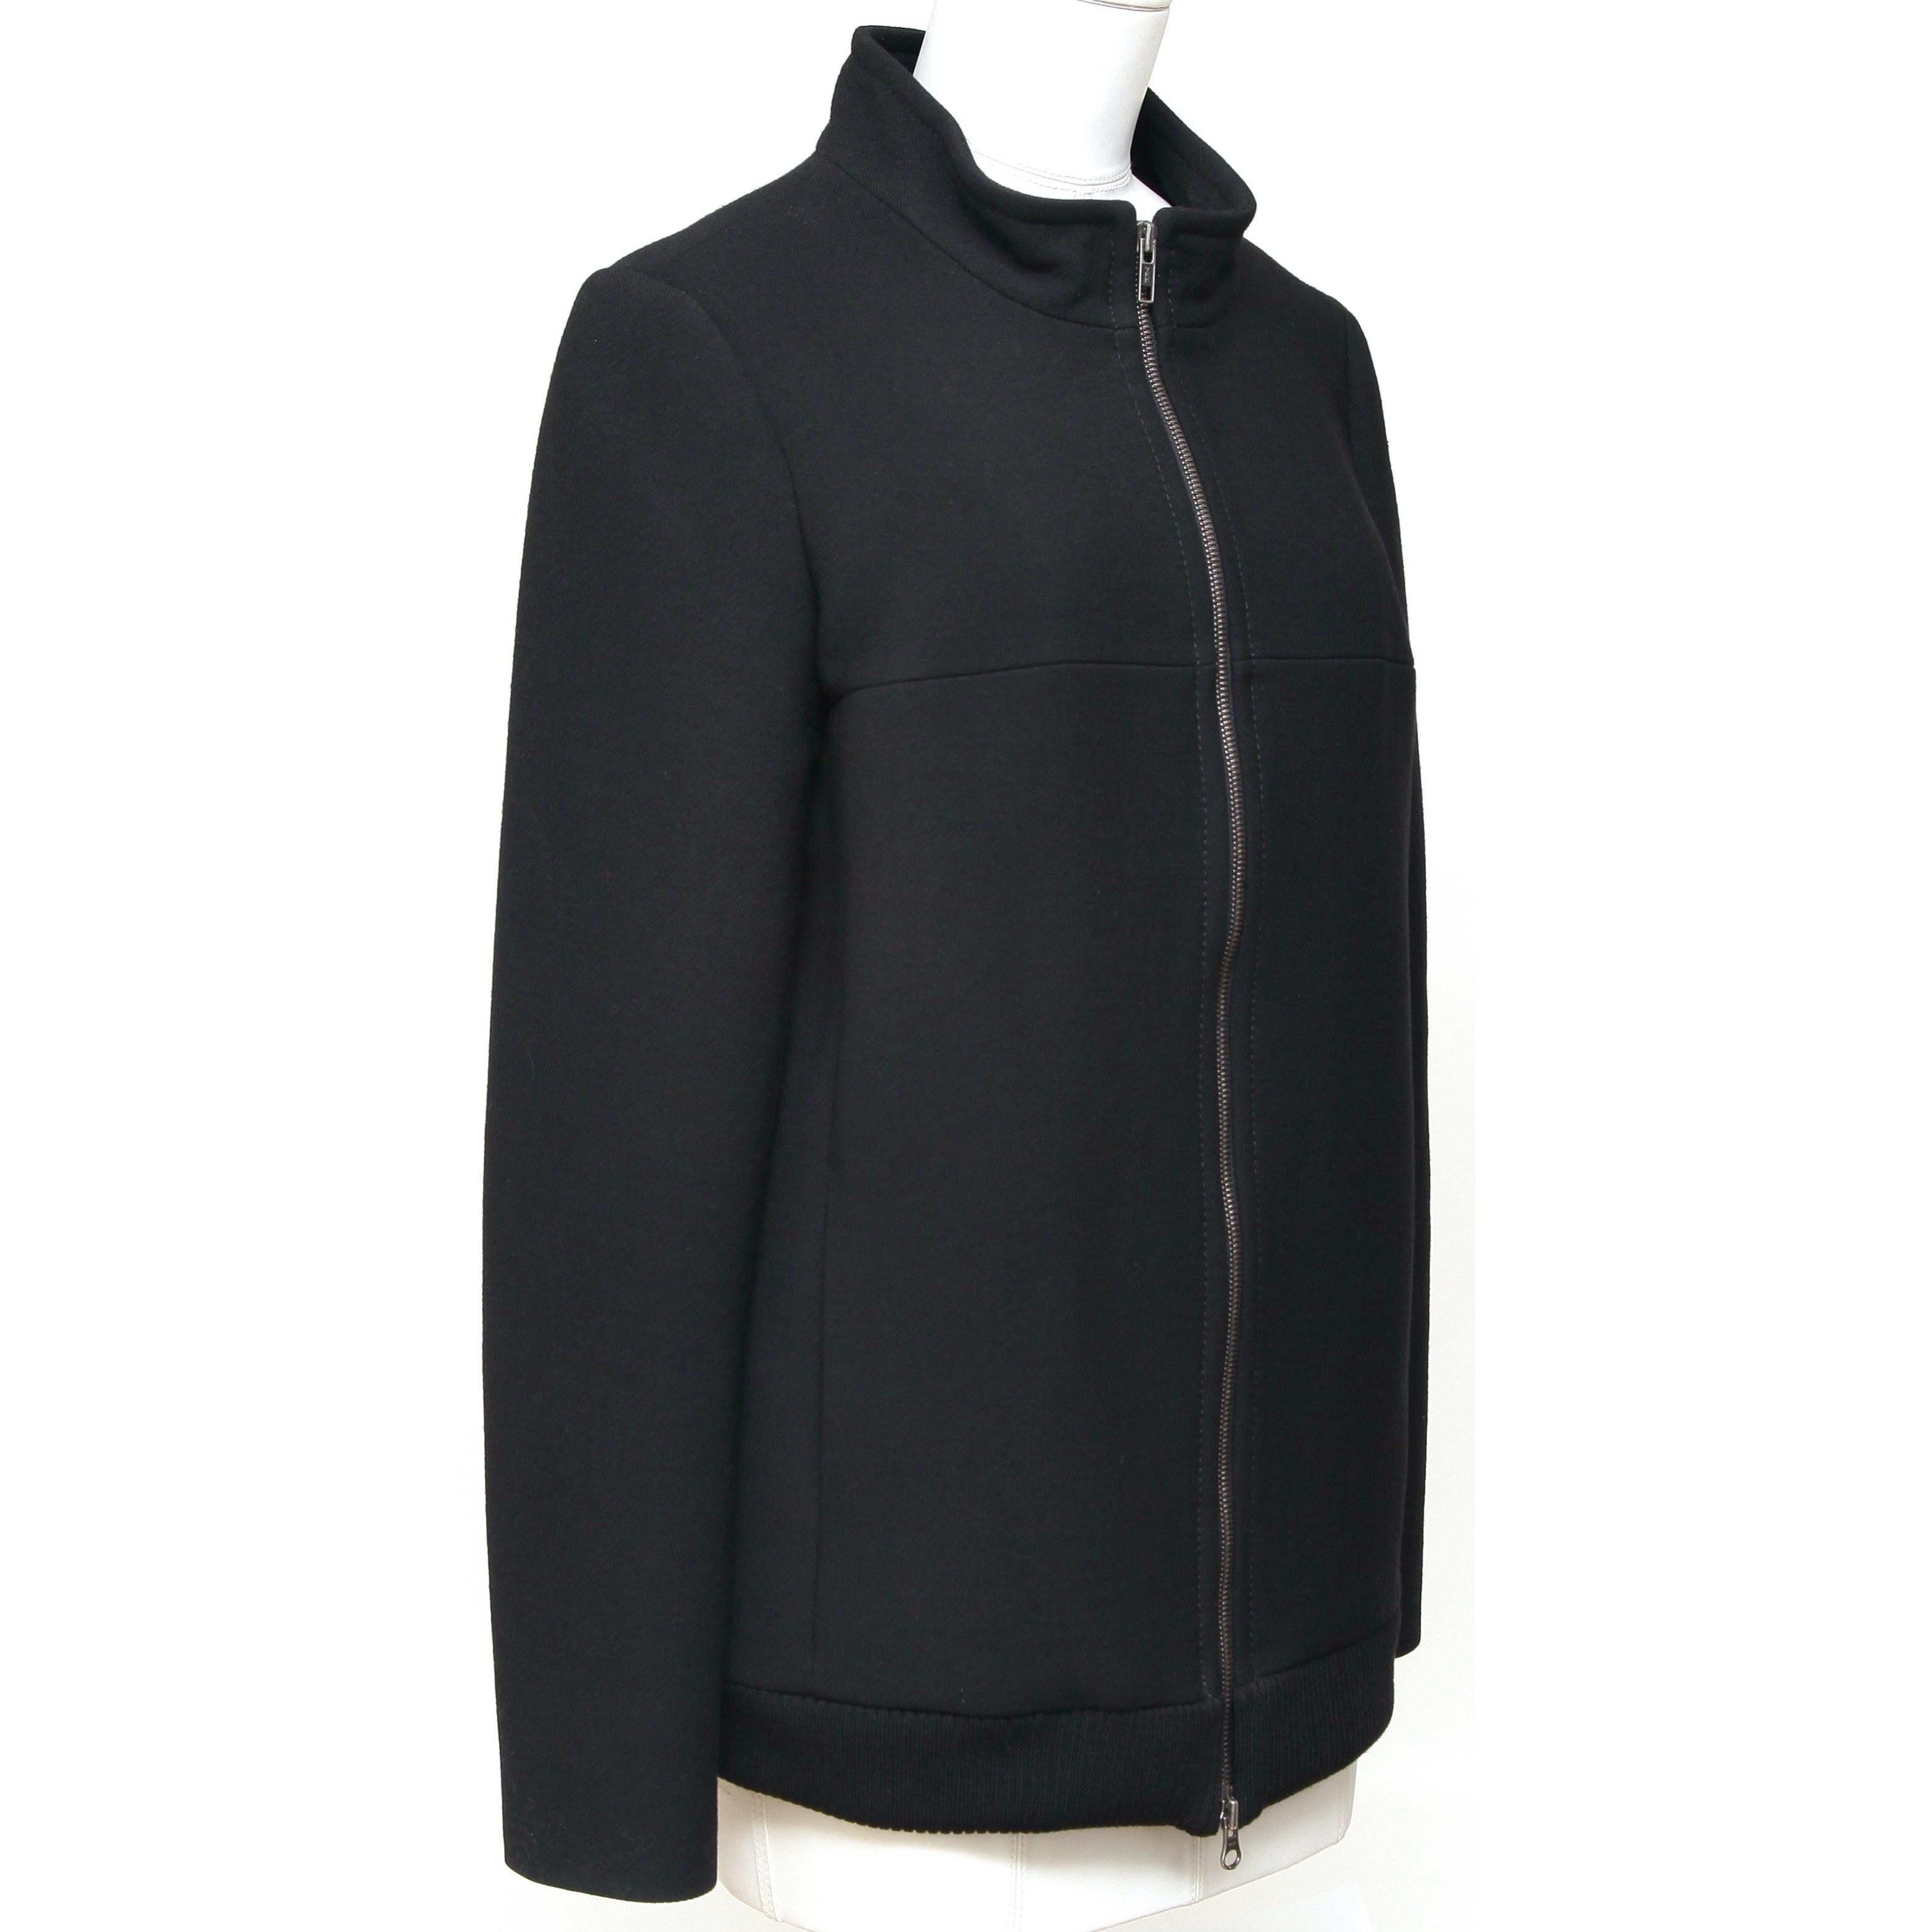 GUARANTEED AUTHENTIC CHLOE 2007 BLACK LONG SLEEVE JACKET

Design:
• Basic jacket in a black color.
• Stand-up collar.
• Dual front vertical slip pockets.
• Long sleeve.
• Front two way zipper closure.

Material: Viscose, Wool

Size: 36

Measurements